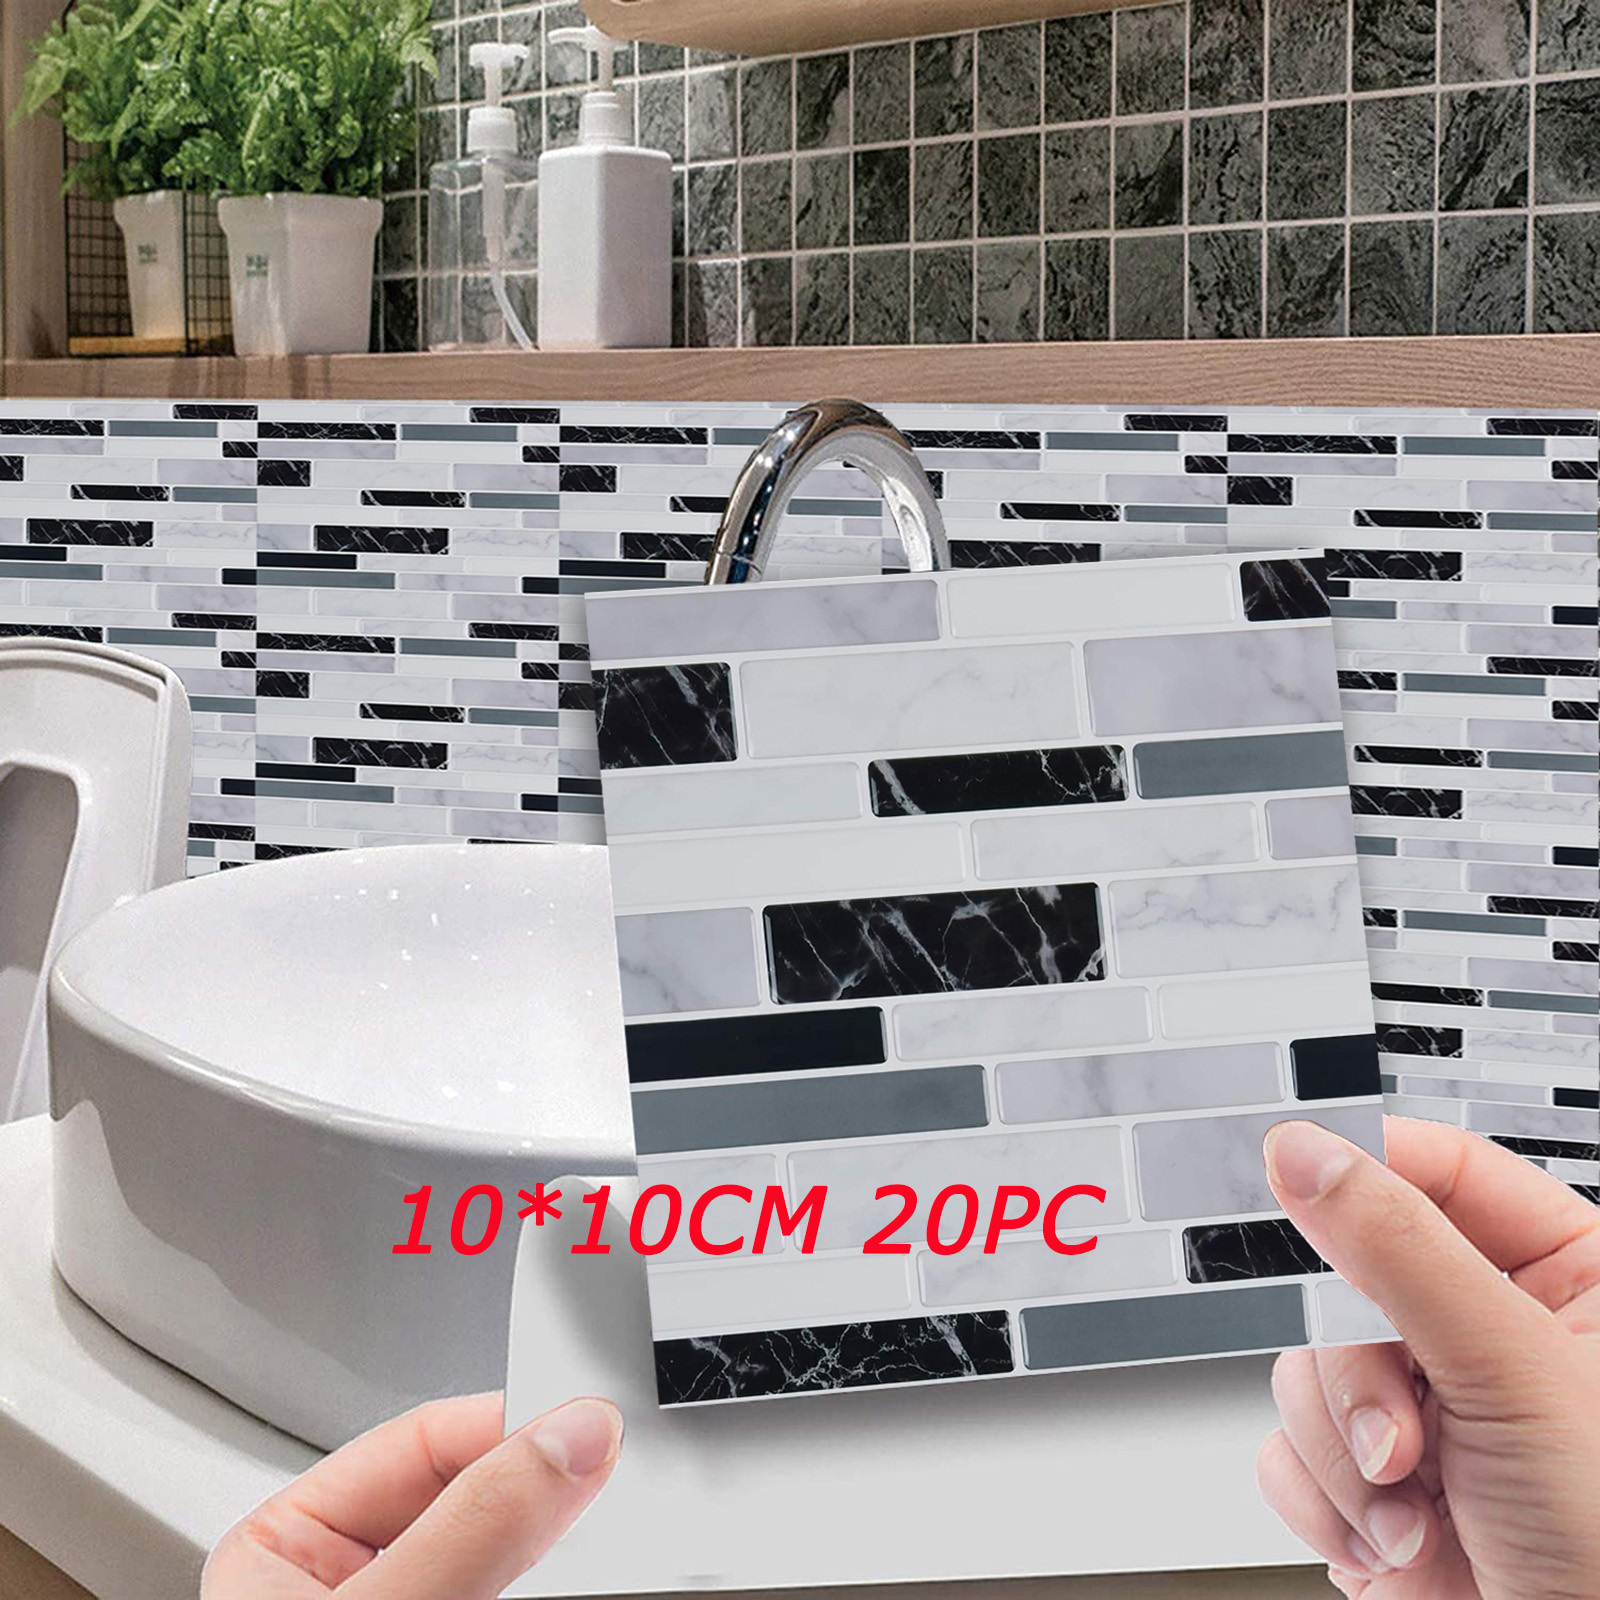 Mosaic Tile Wall Sticker Adhesive Decal Home Kitchen Bathroom Decor Waterproof 